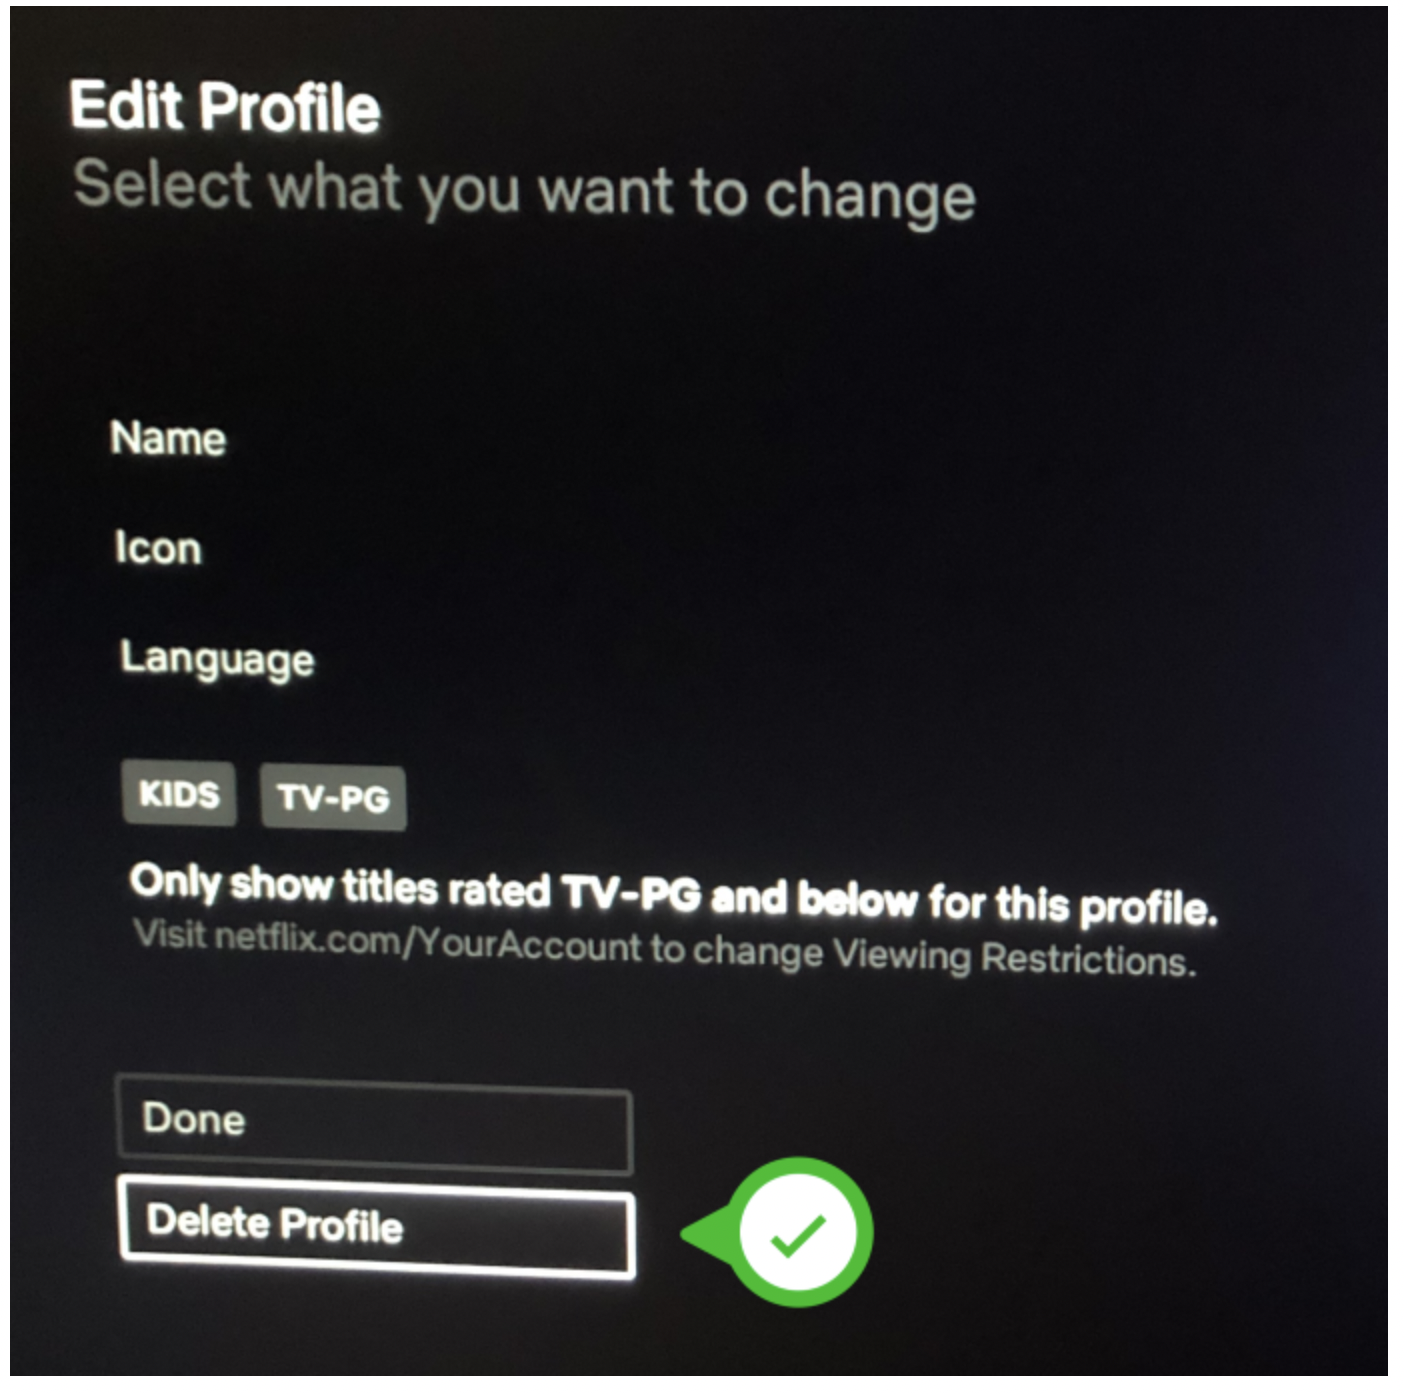 How To Delete a Profile From Netflix